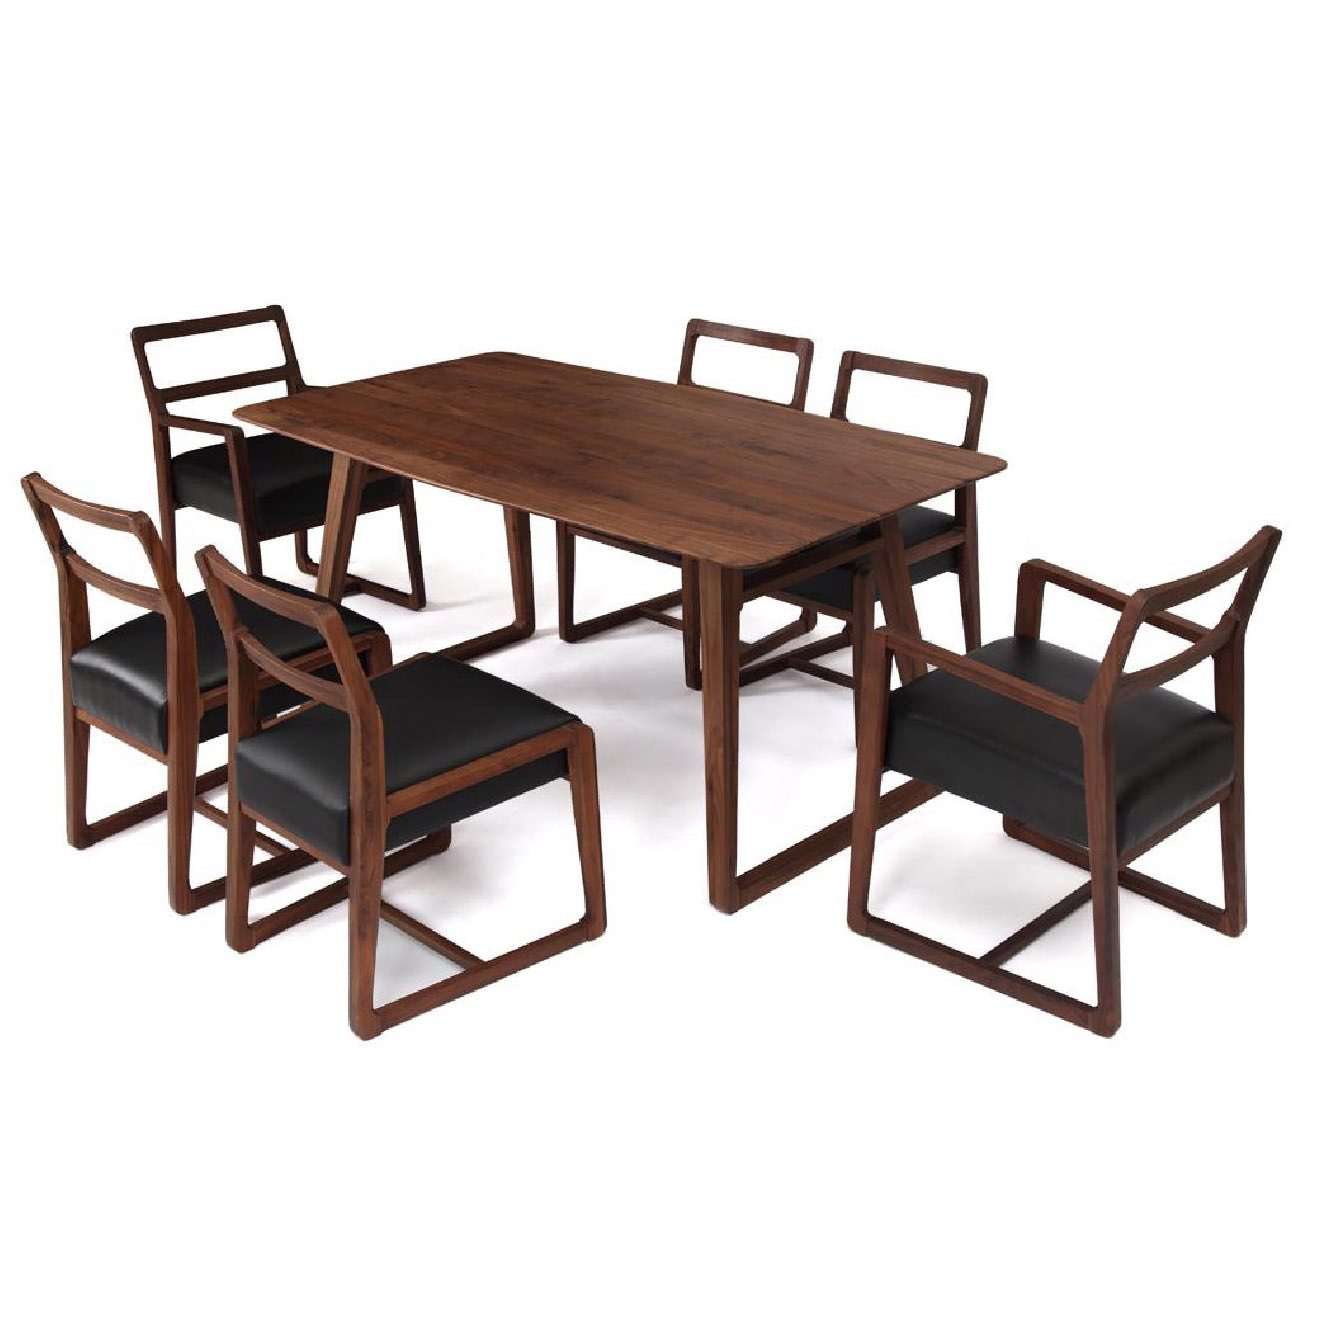 Dining set|Dining room Furniture|Dining table